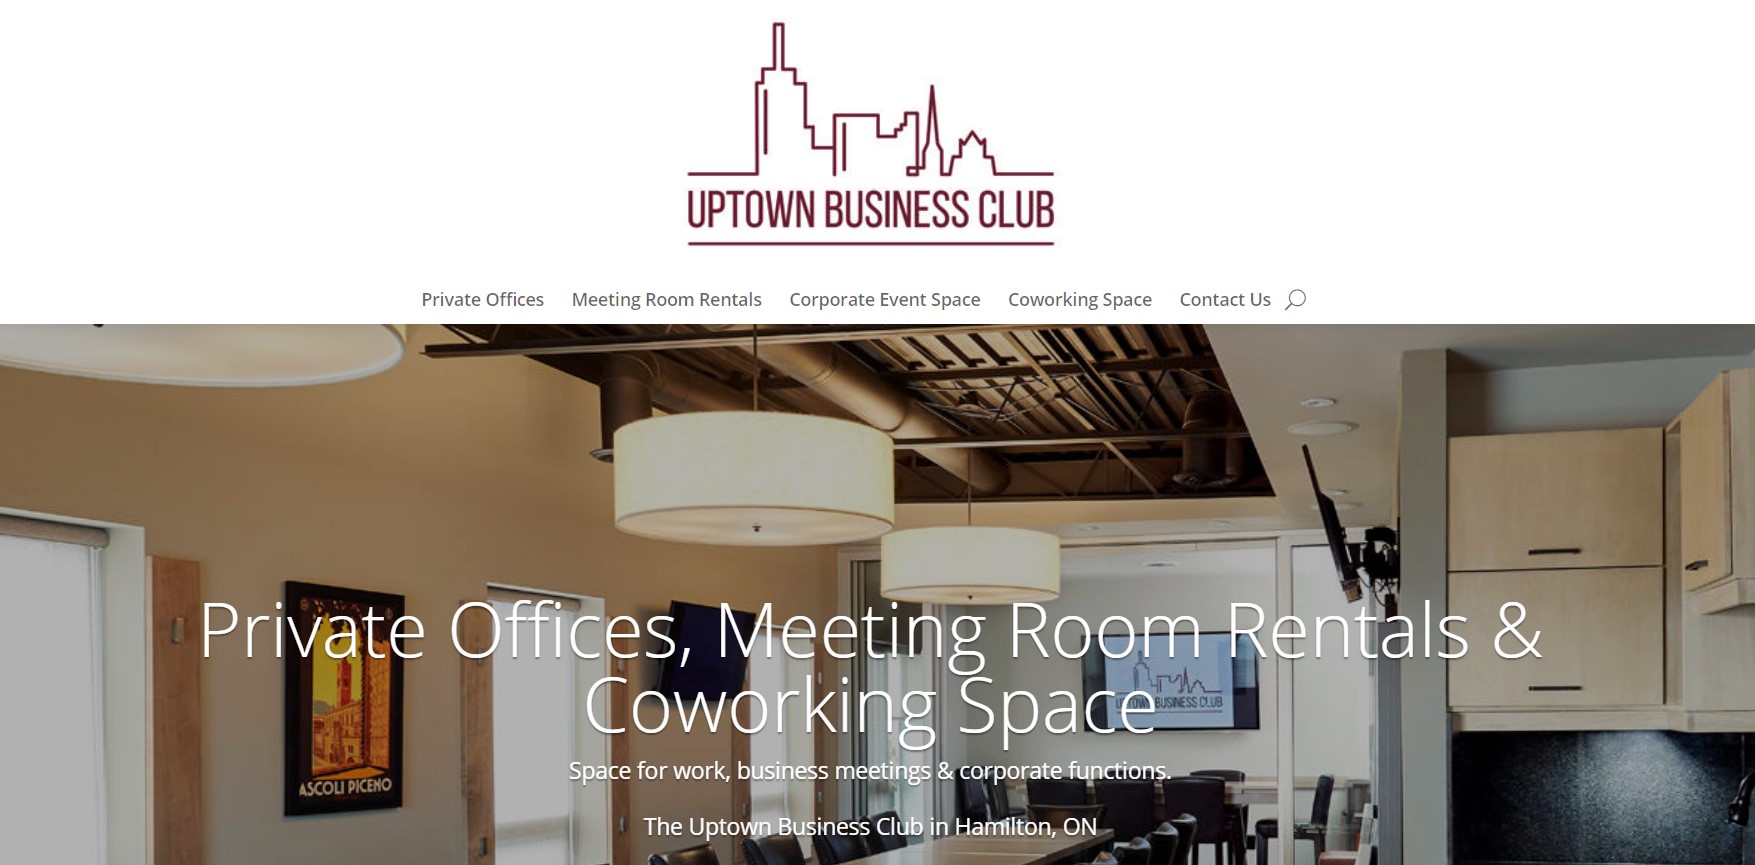 uptown business club office space rental in hamilton